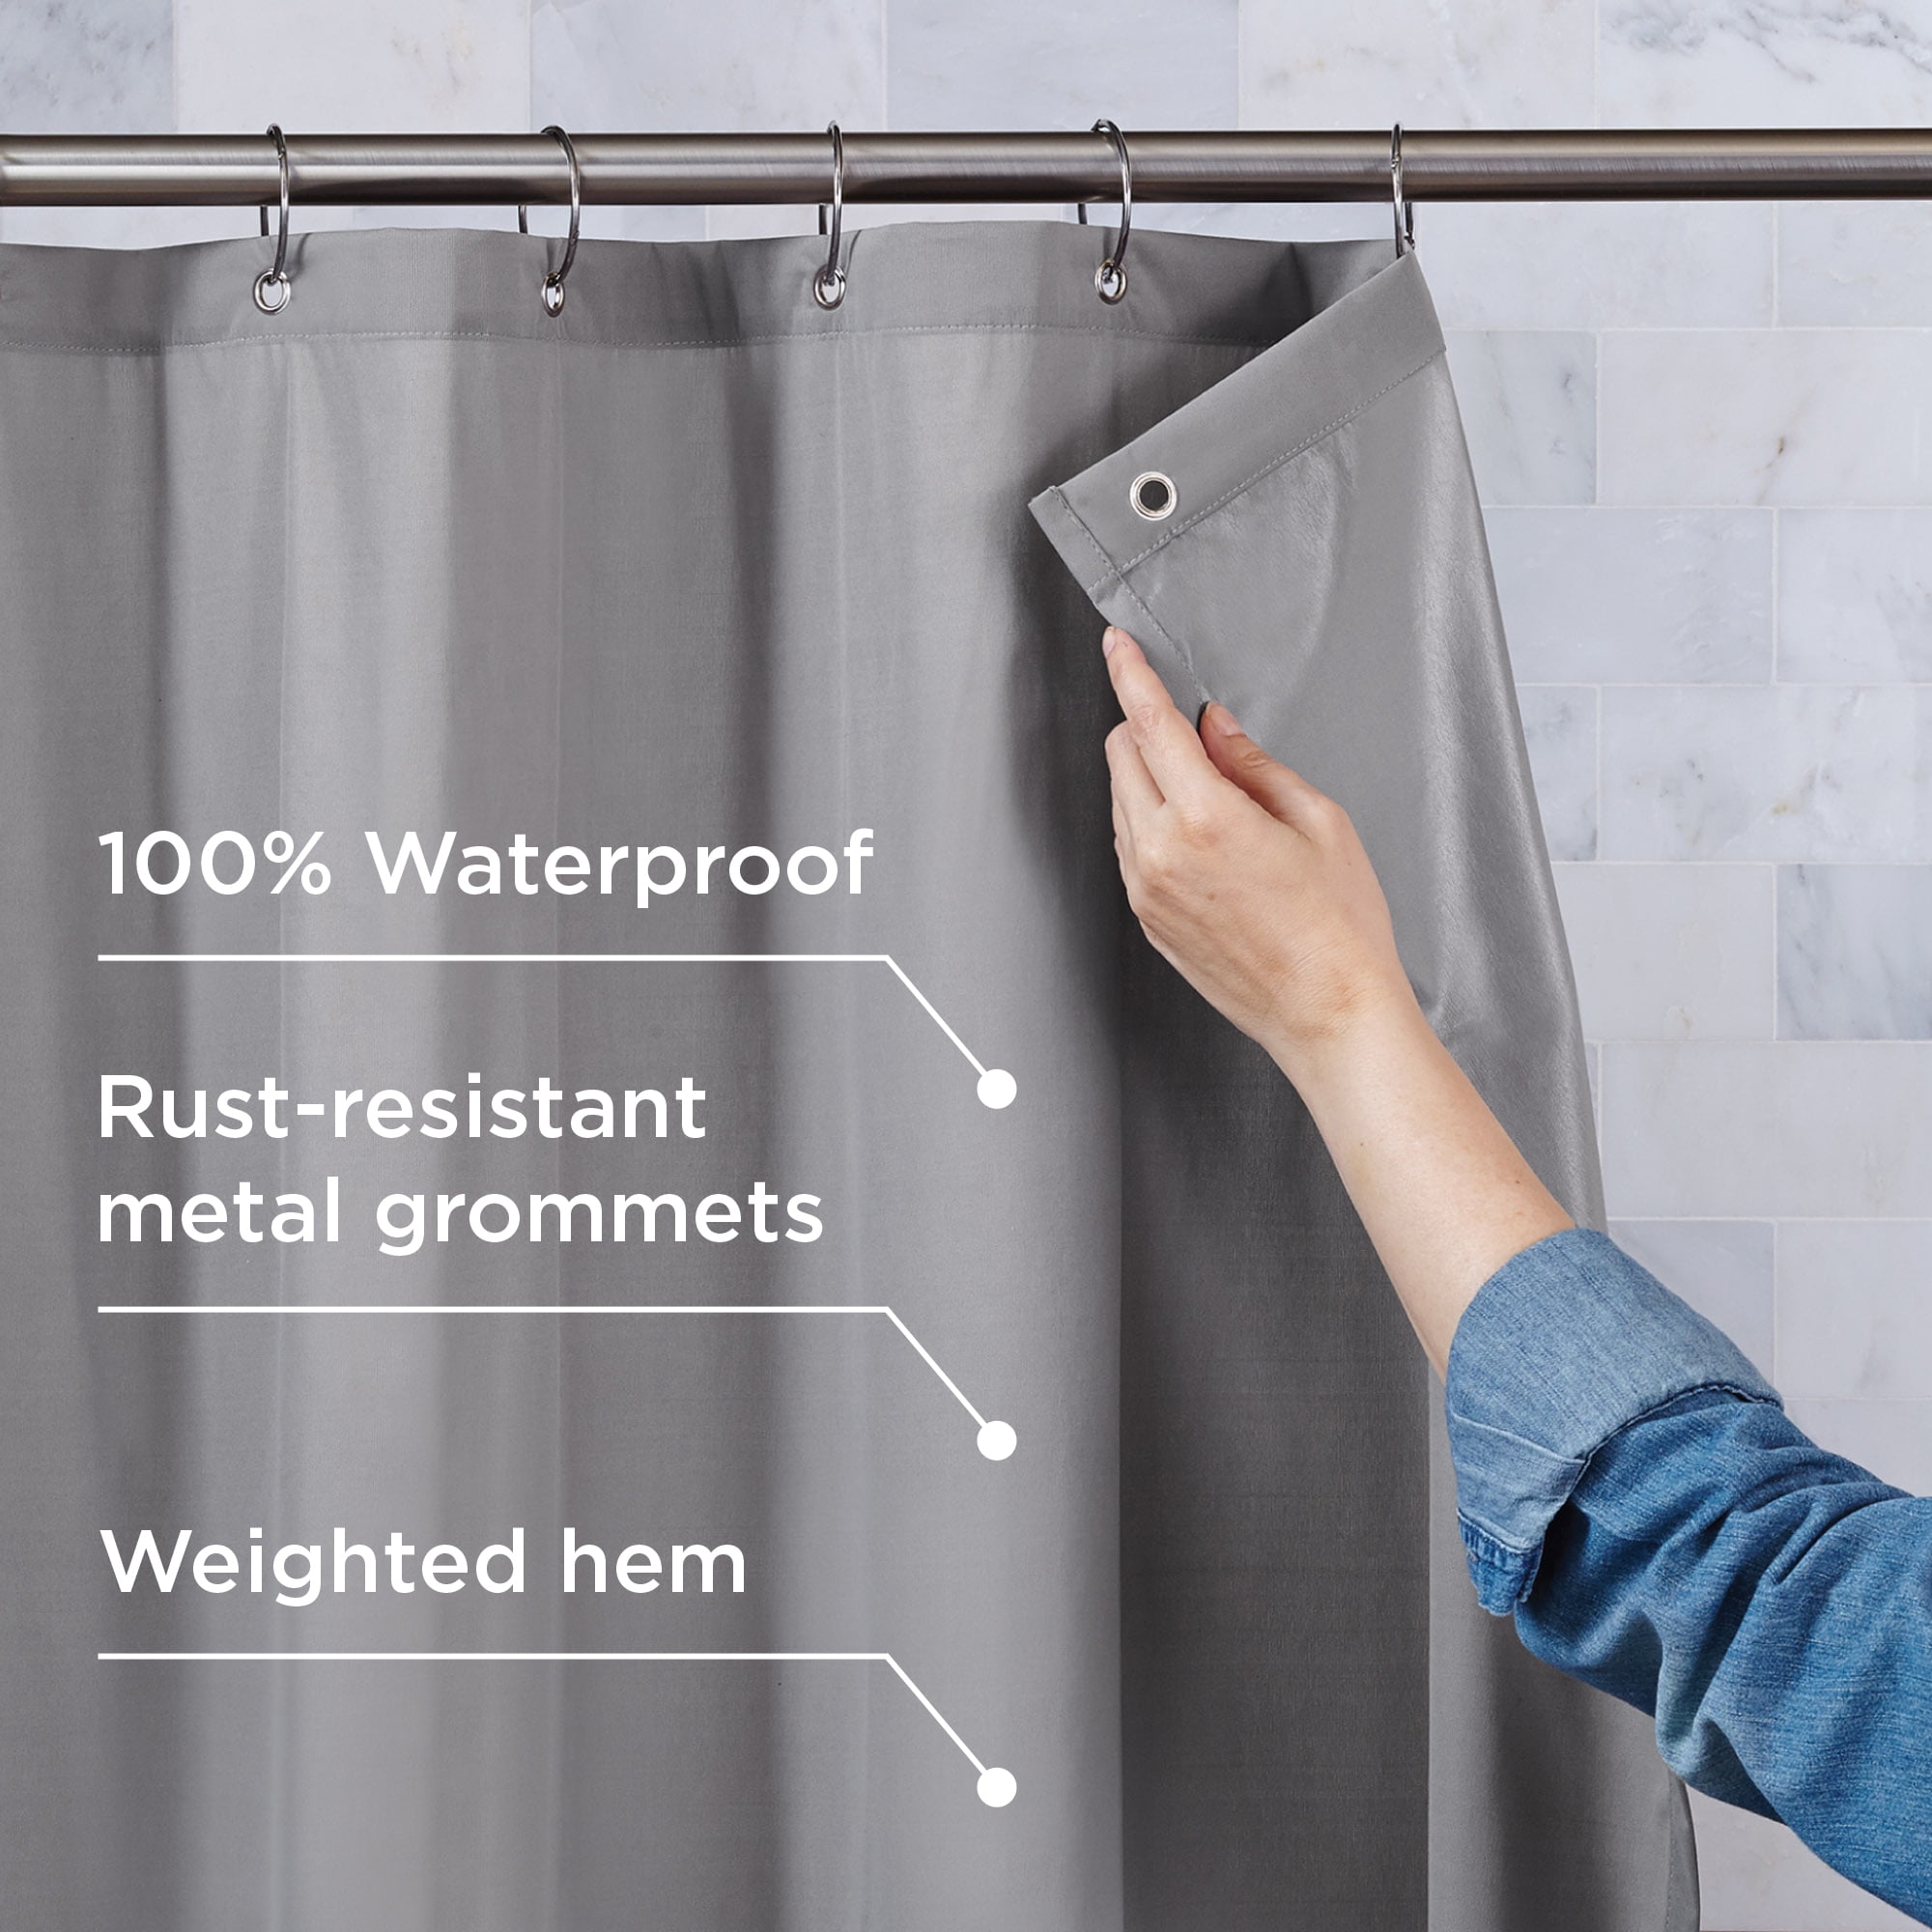 Waterproof Fabric Shower Curtain Or, Are Vinyl Shower Curtains Safe